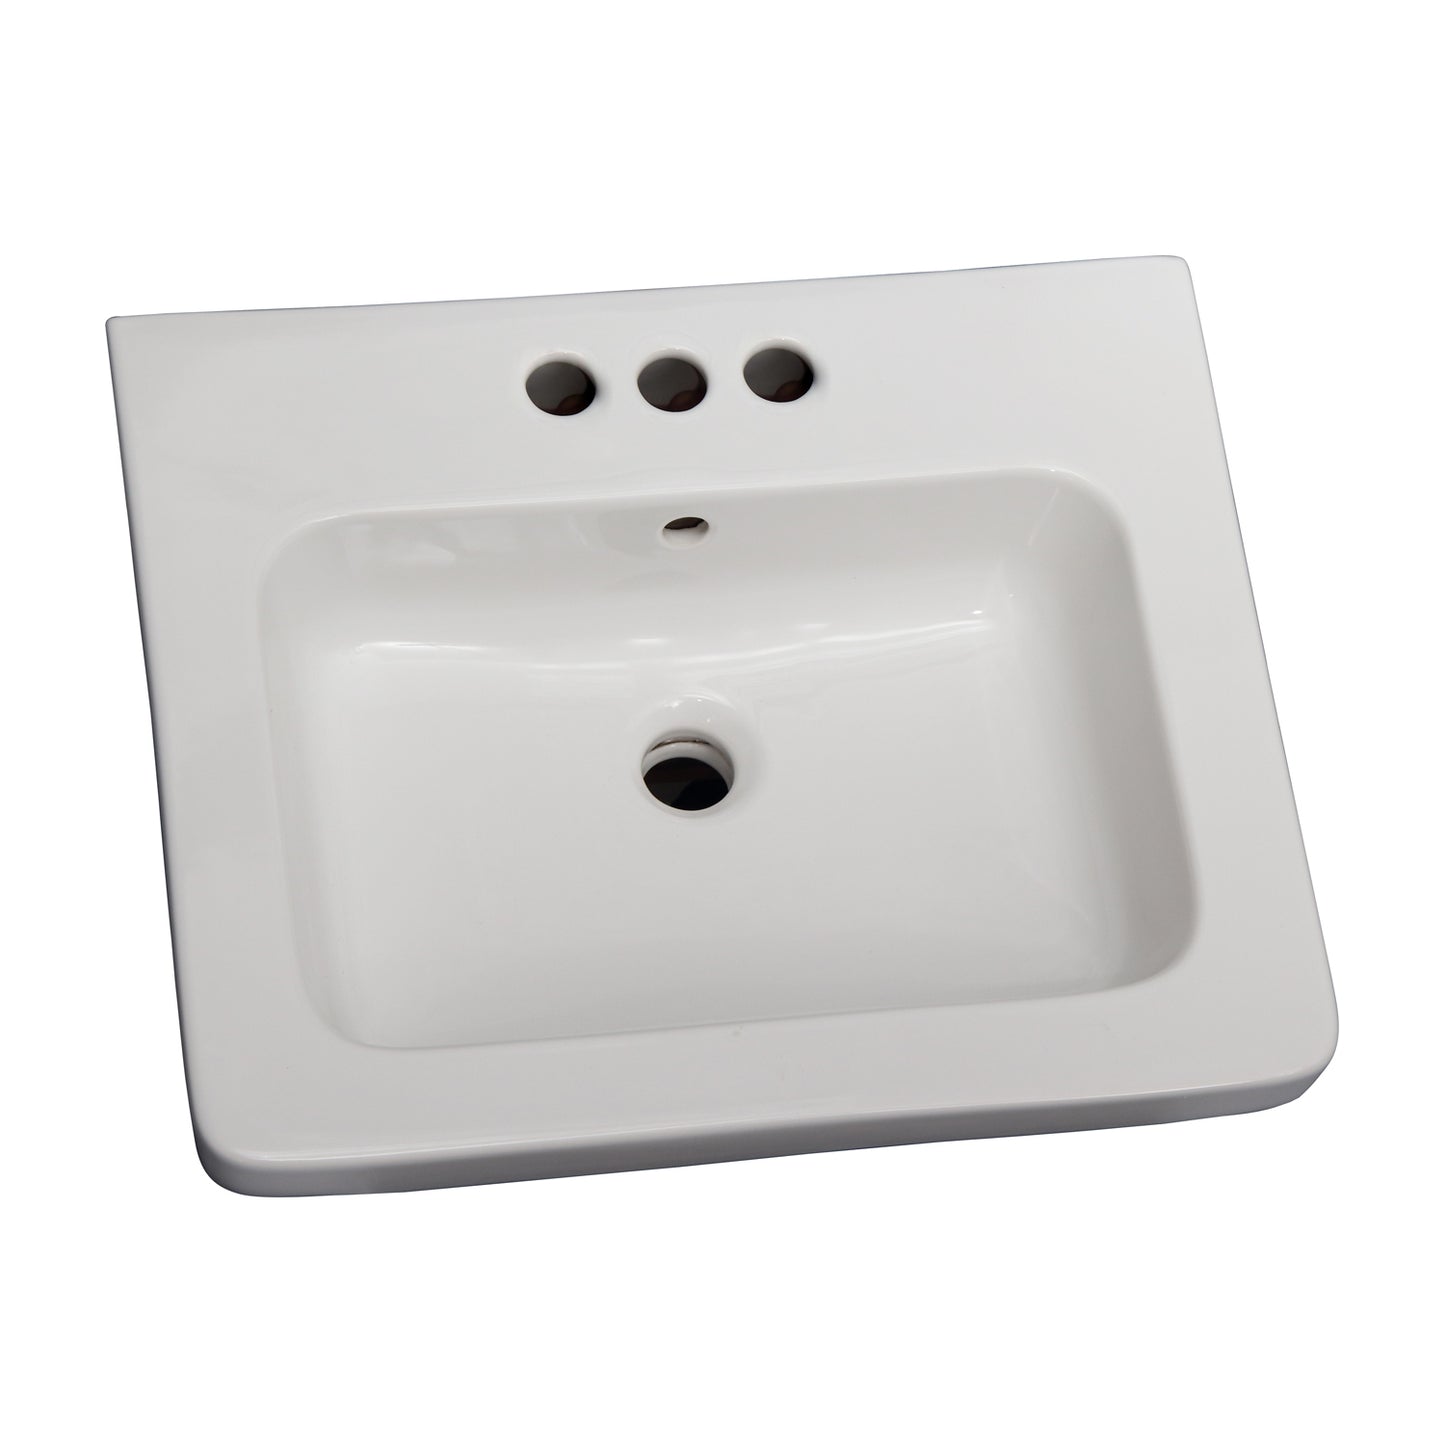 Resort 500 Wall Hung Bathroom Sink White For 4" Centerset Faucet